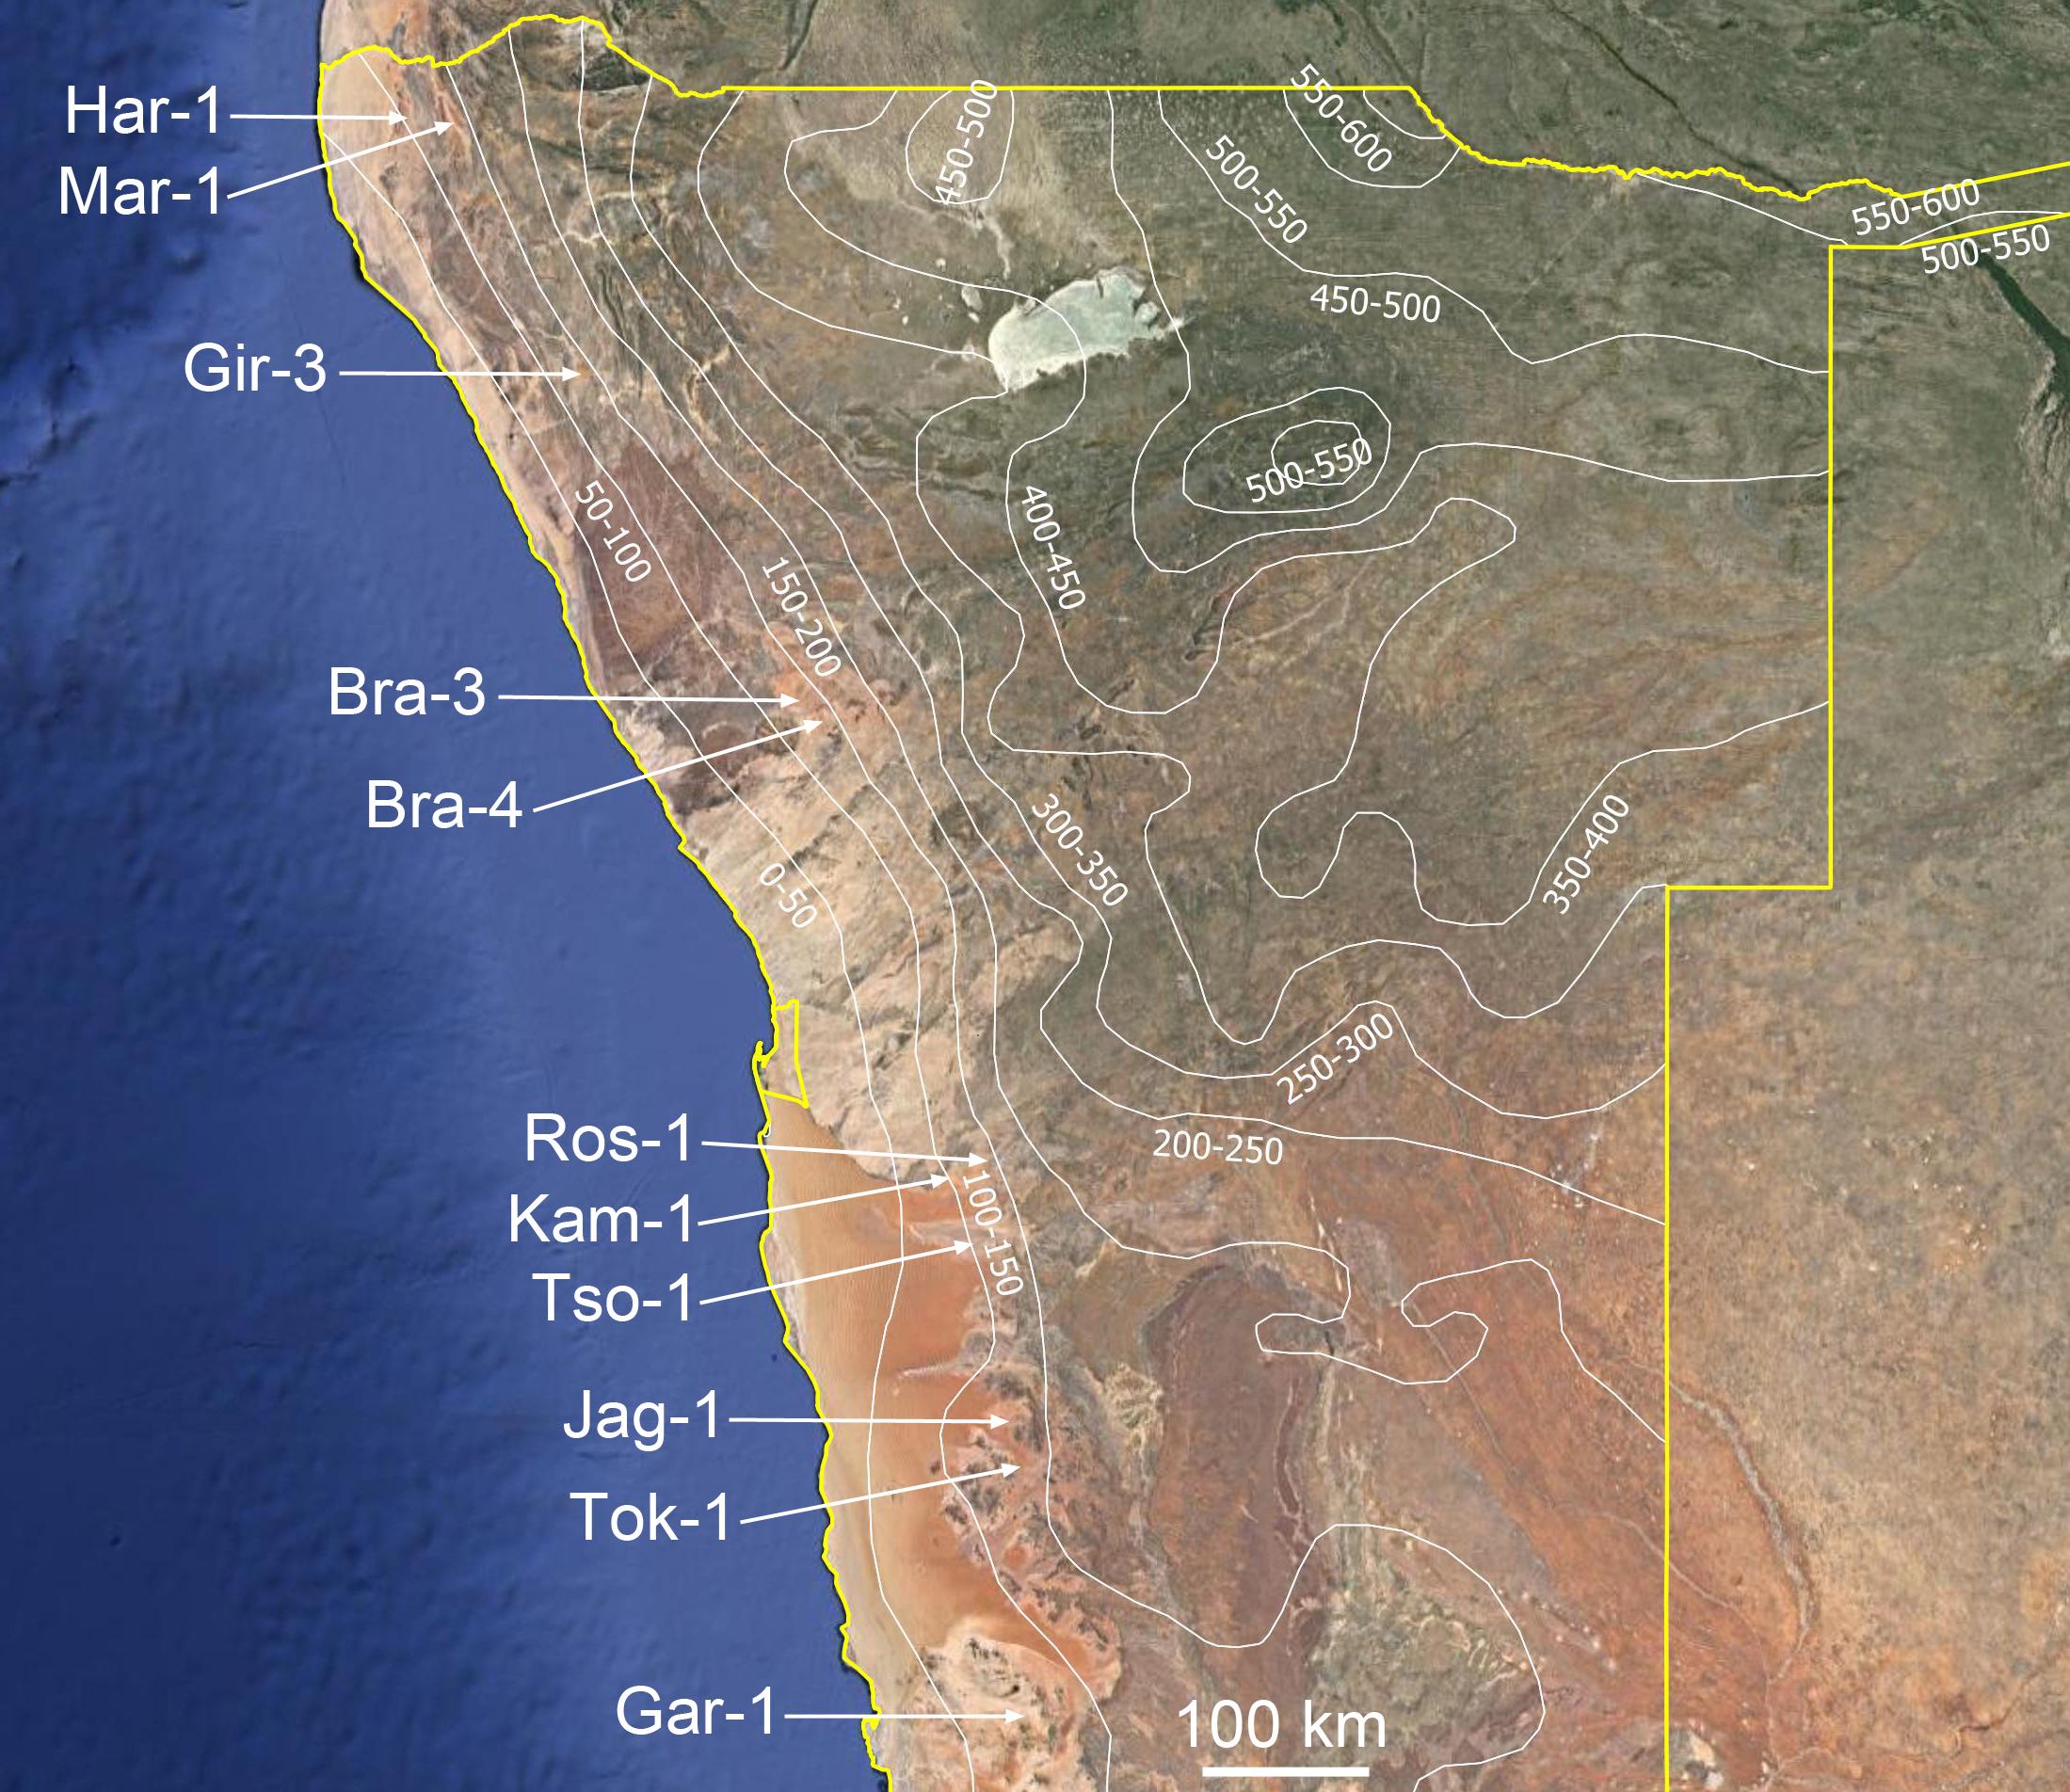 A map of Namibia showing all the study sites.